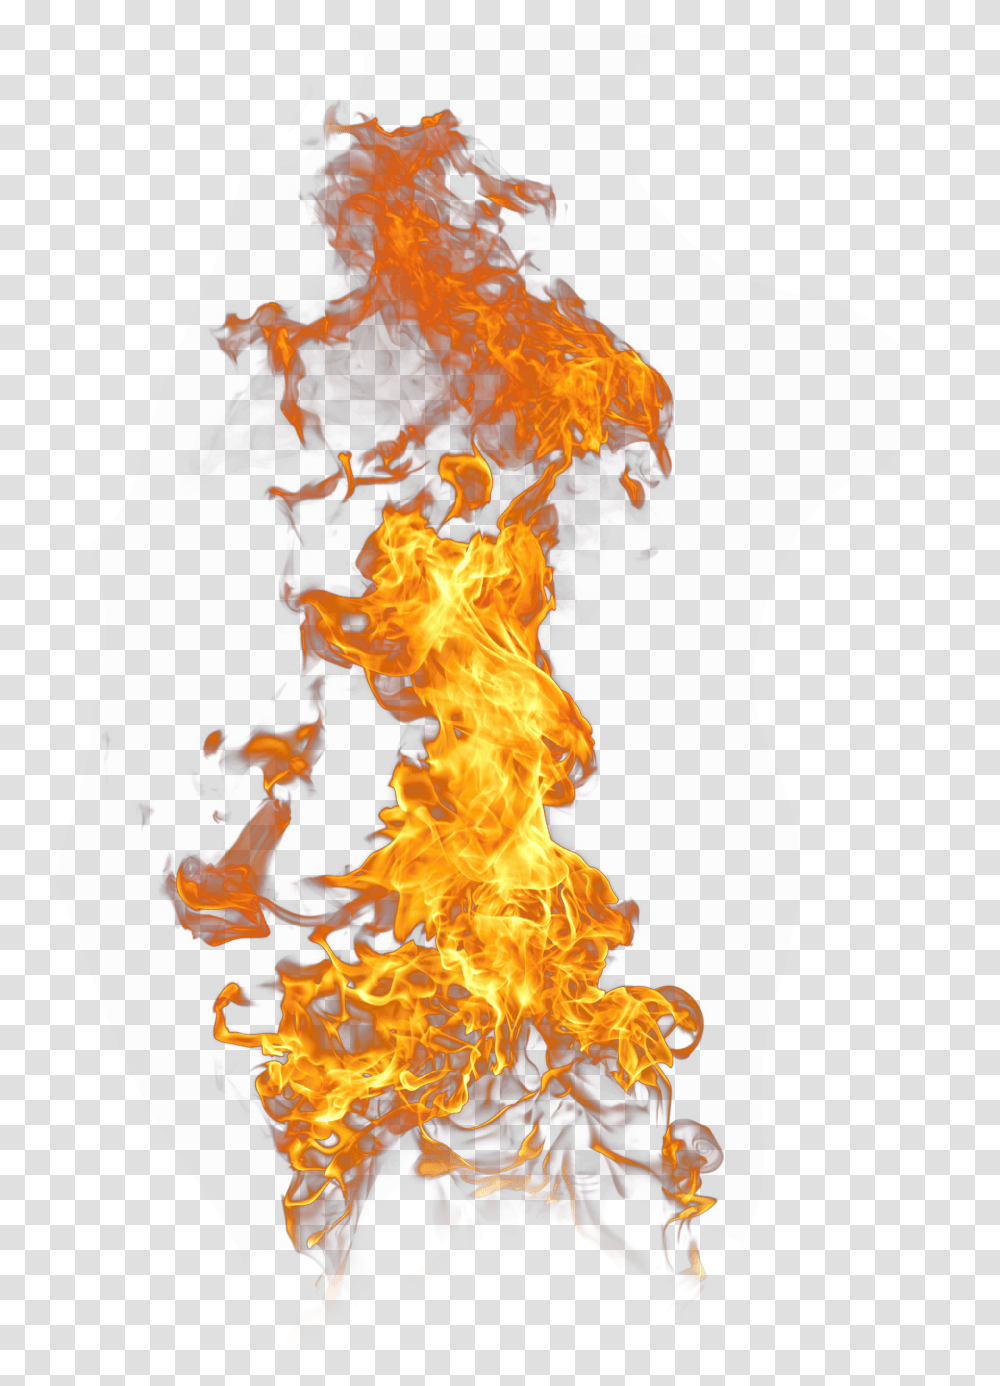 Flame Effect Free Clipart Hd Clipart Background Flame Effects, Fire, Bonfire Transparent Png